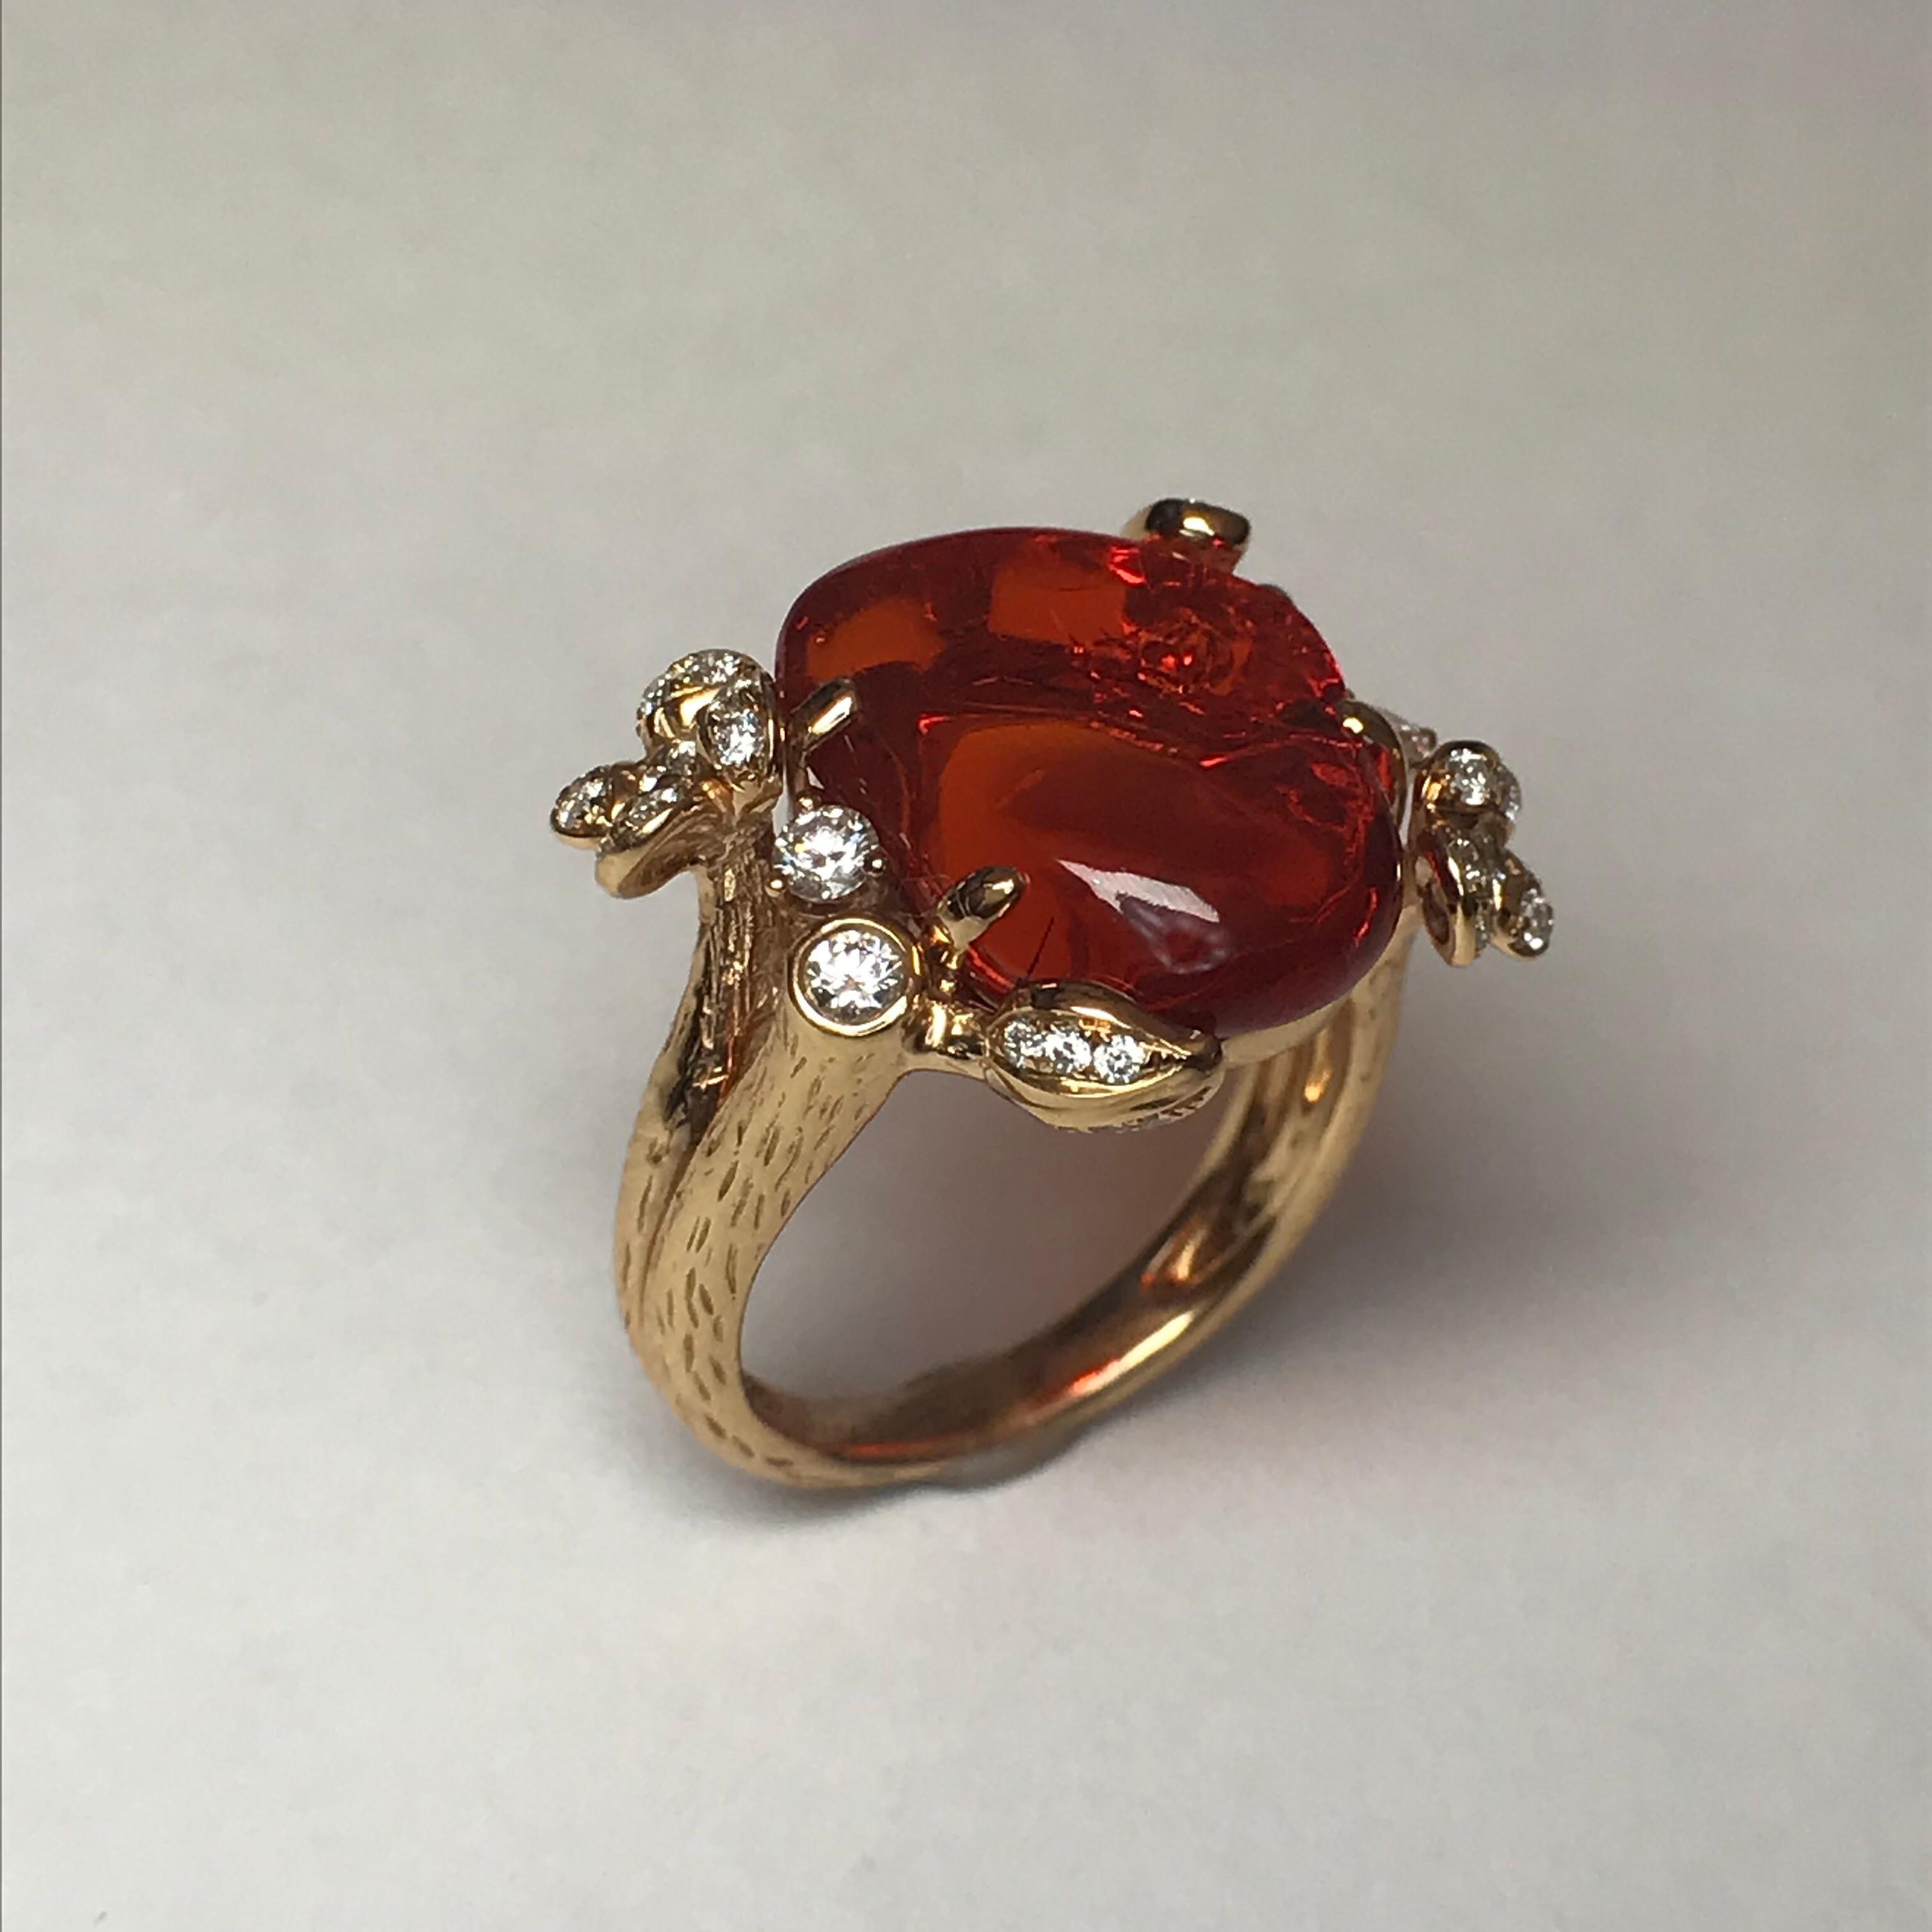 A unique hand-carved crimson red fire opal provides the visual warmth to make this ring bloom. The warm rose gold is patterned with a bark texture and sprouts diamond flowers and leaves.

Free-Form Fire Opal: 6.20cts.
Round Brilliant-Cut Diamonds: